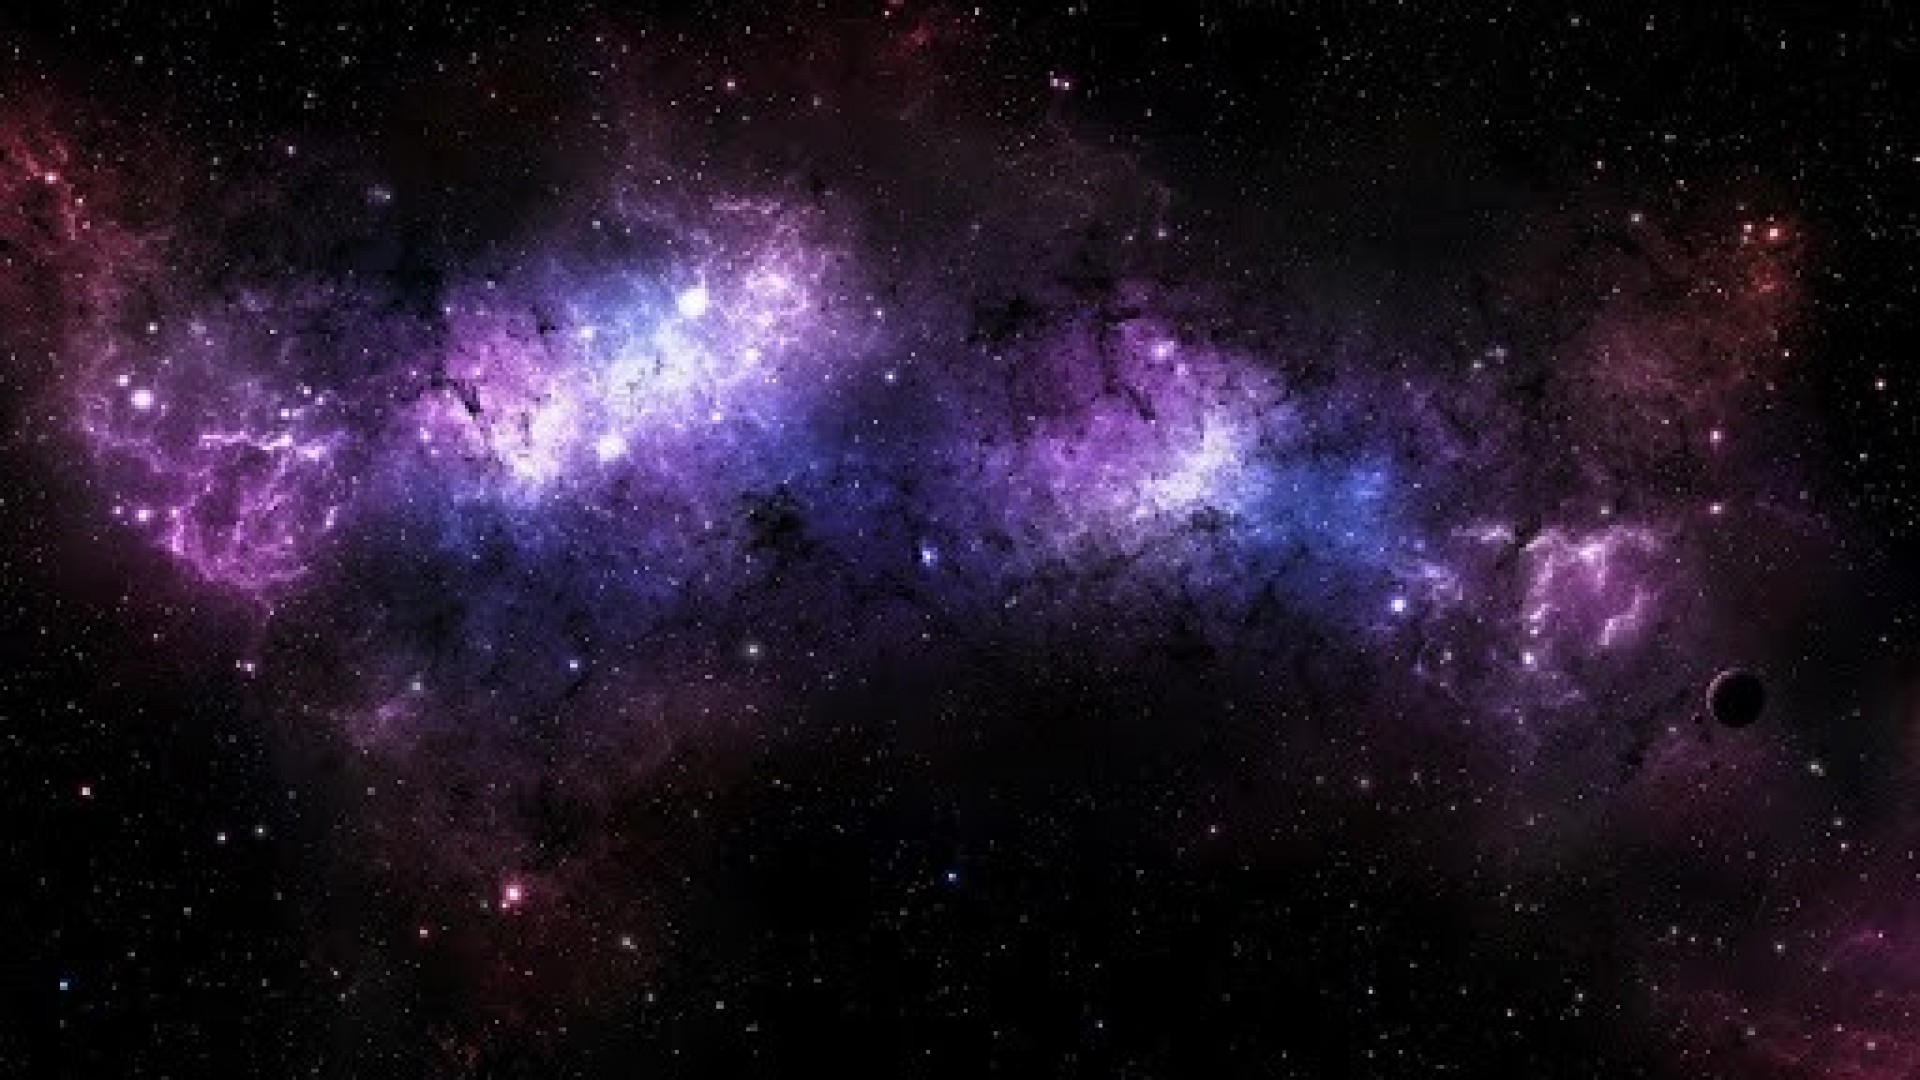 Outer Space Wallpaper HD Images by sheikhsherry44 on DeviantArt